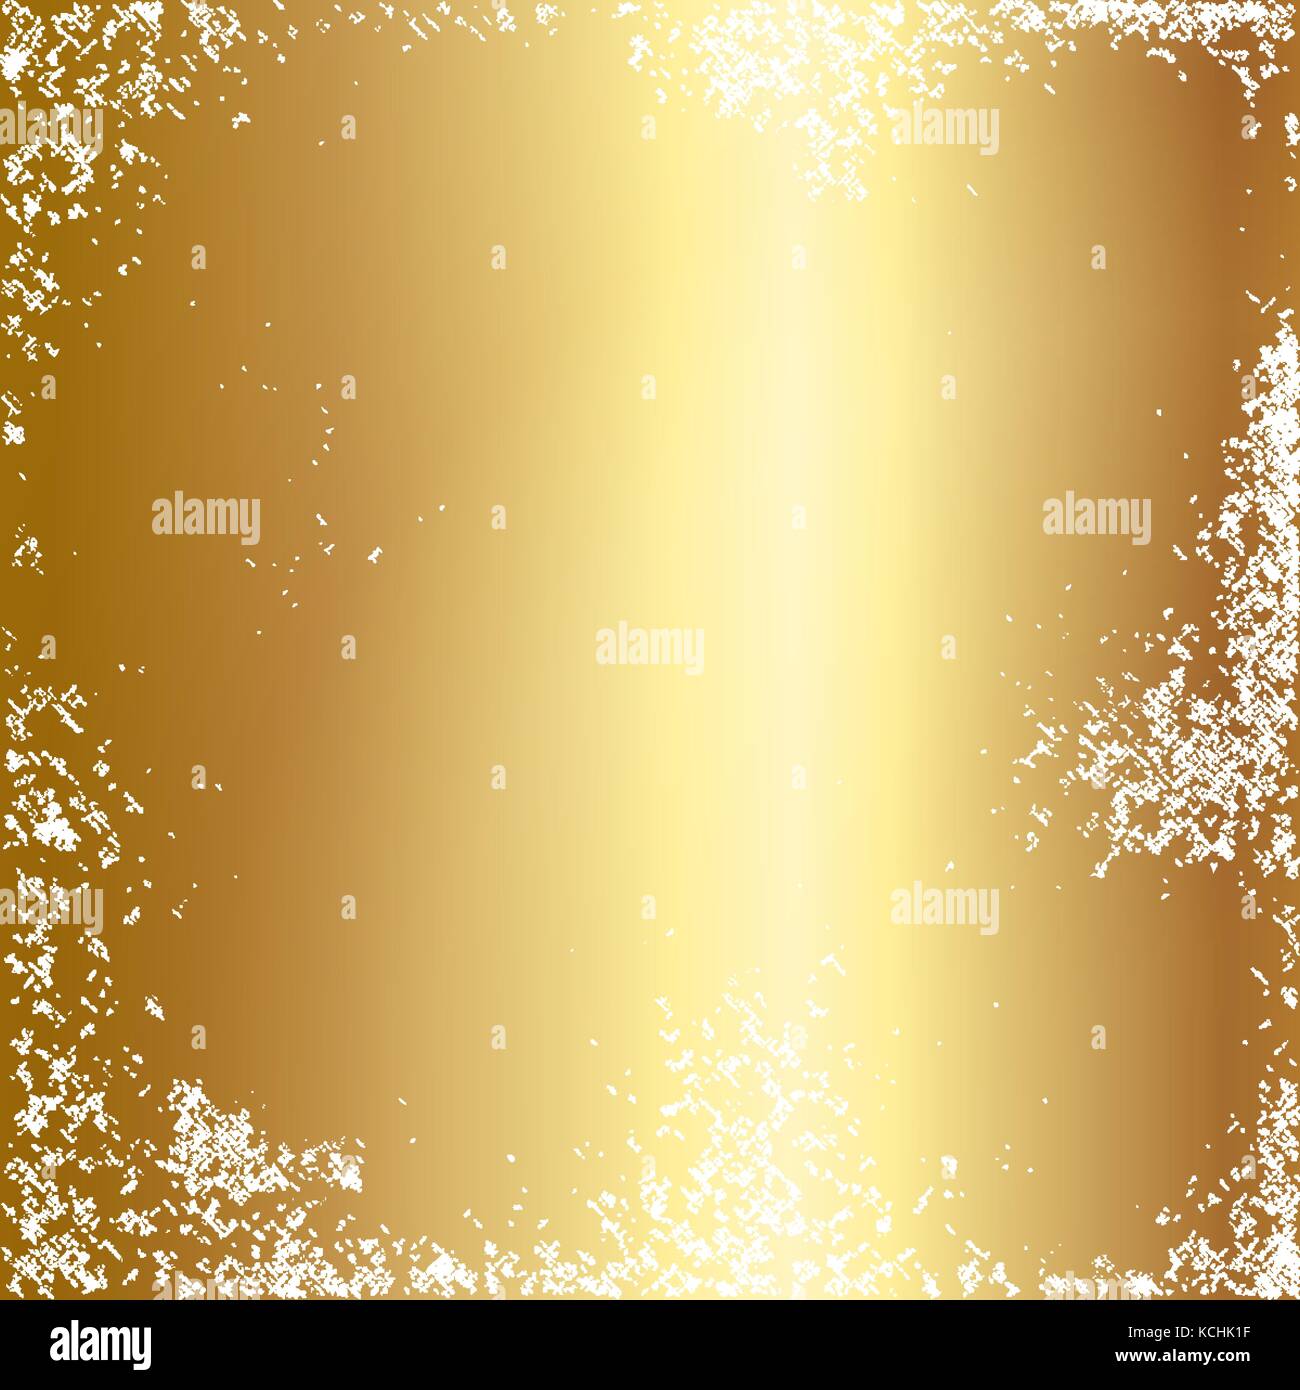 Gold foil texture background. Stock Vector